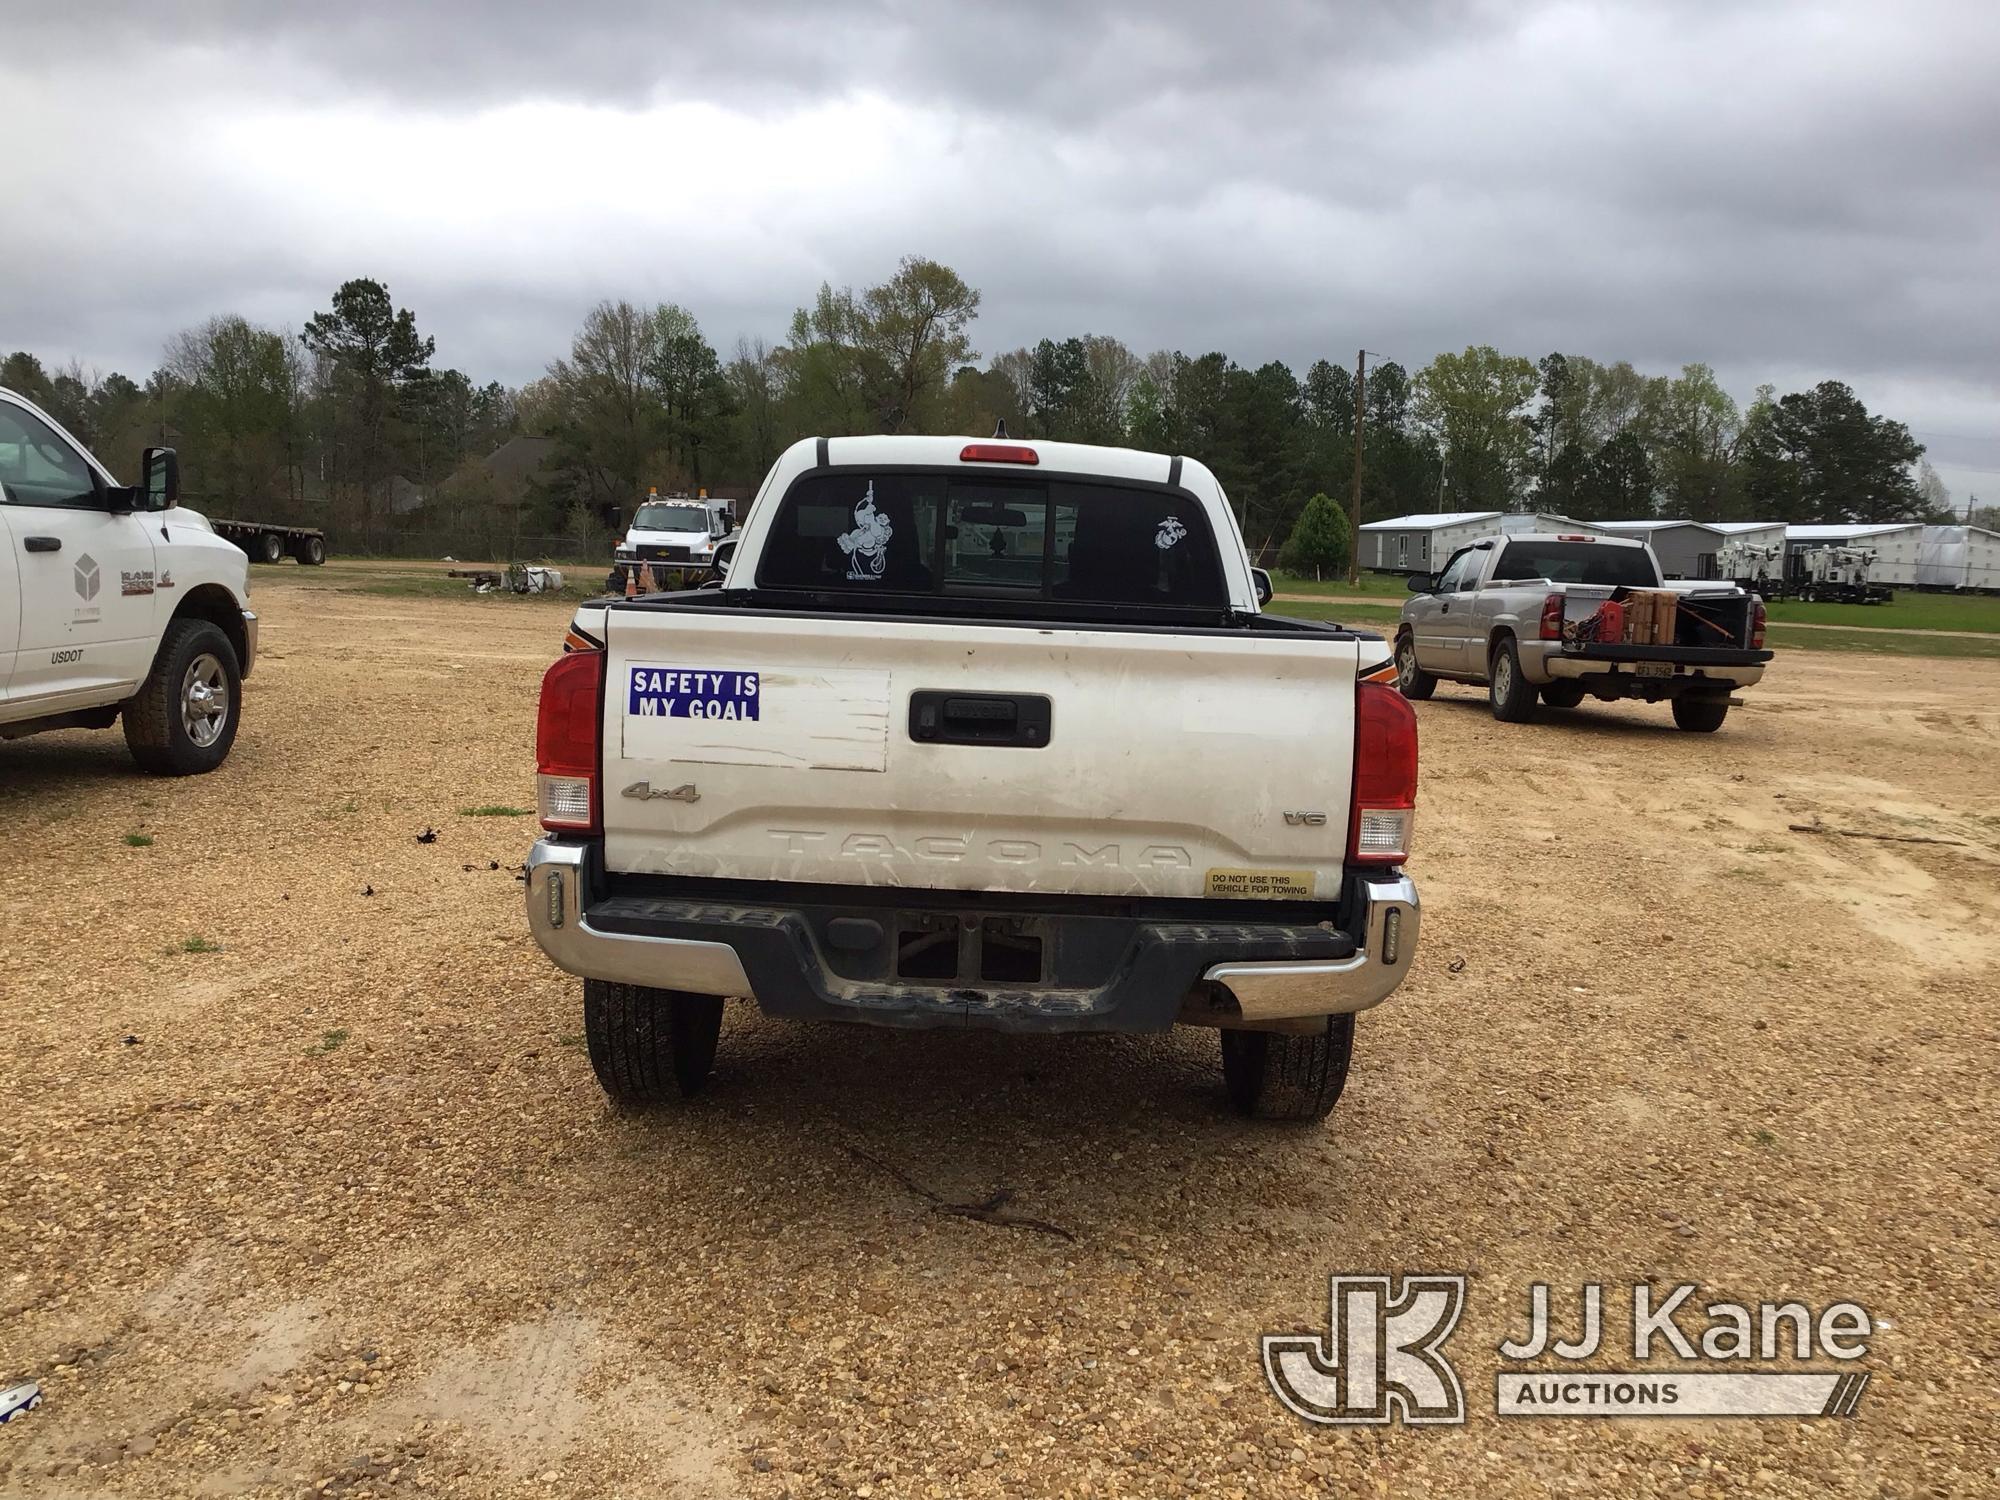 (Byram, MS) 2016 Toyota Tacoma 4x4 Extended-Cab Pickup Truck Runs & Moves) (Windshield cracked, Chec